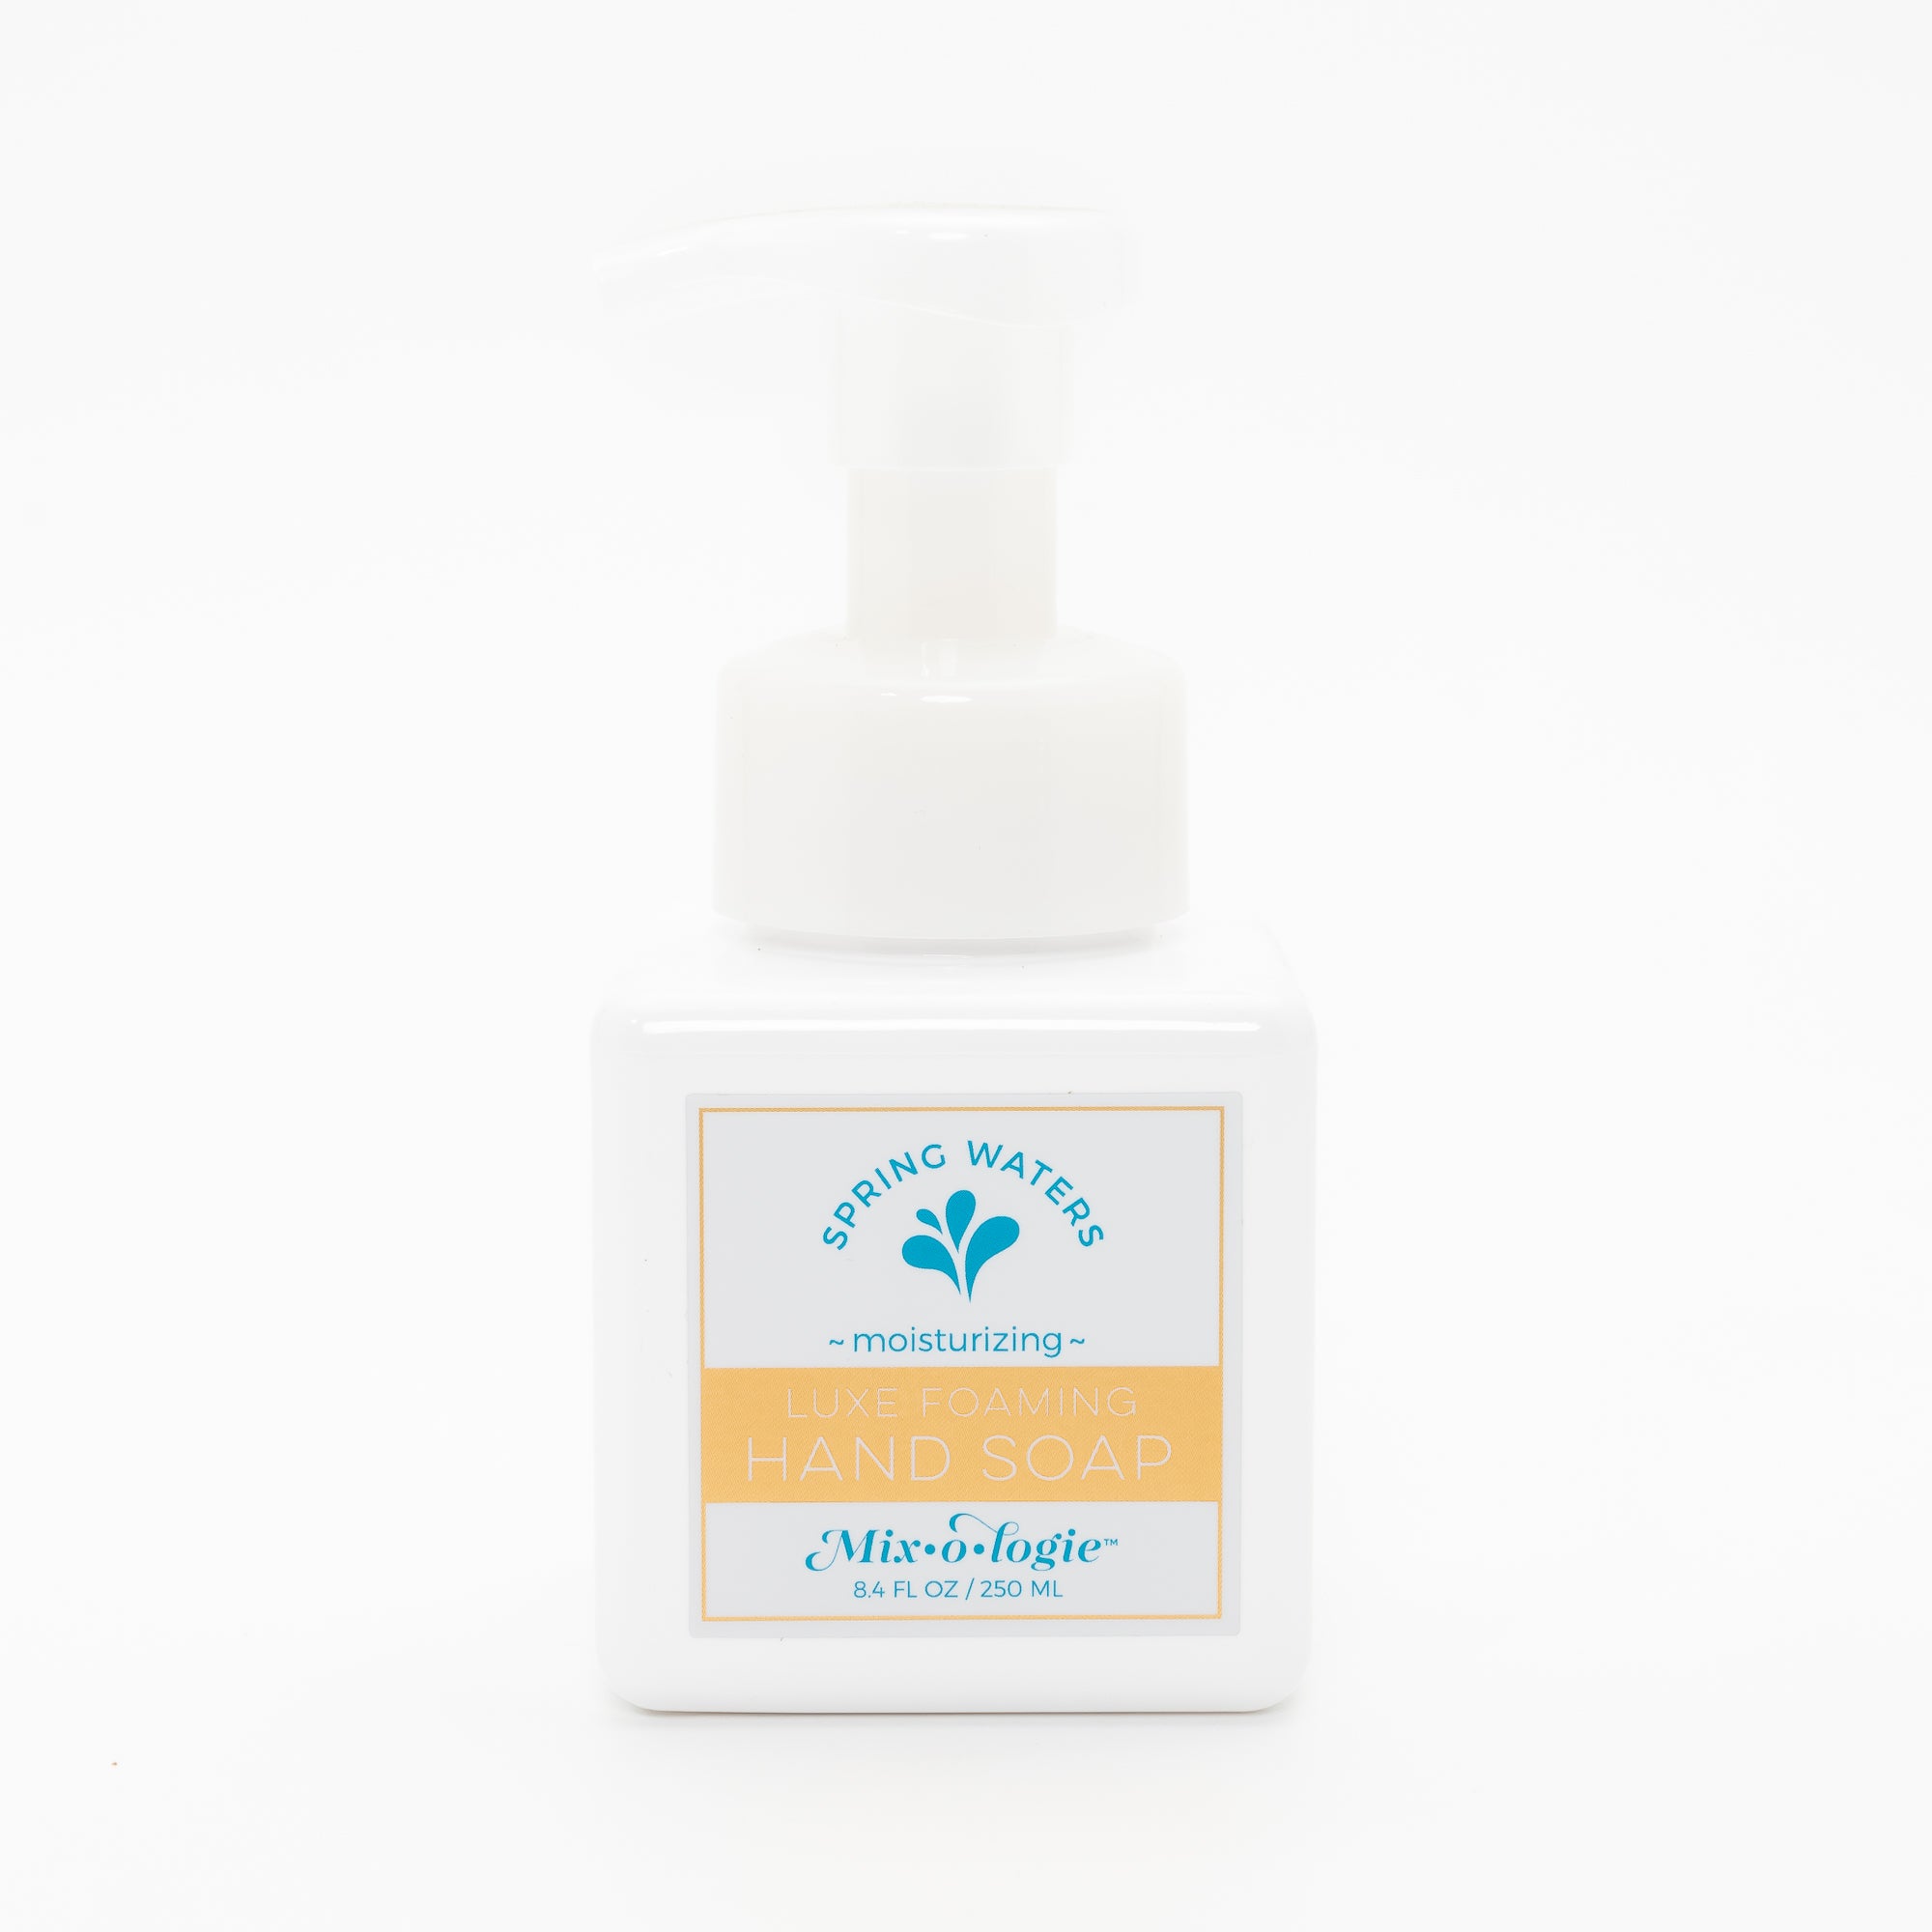 Tester - Foaming Hand Soap - Spring Waters